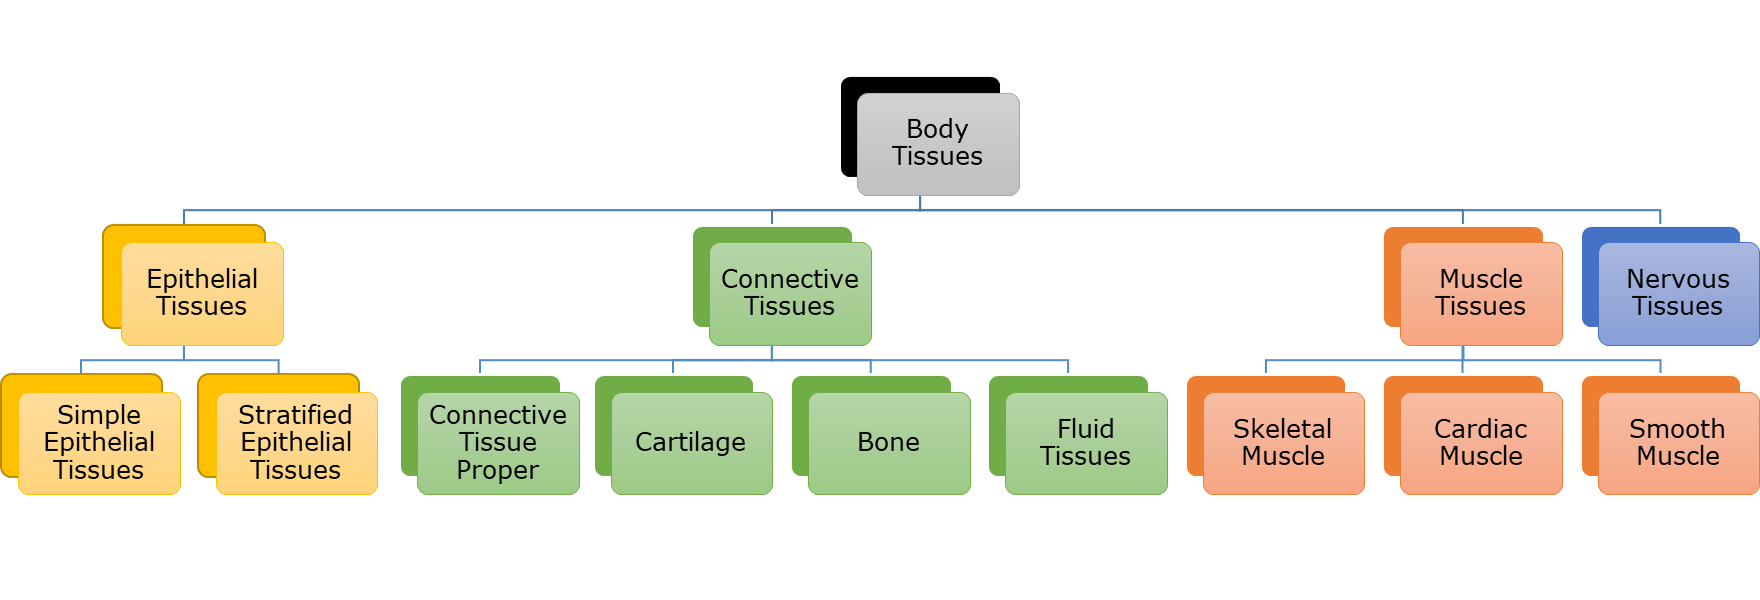 Tissues are organized into four main types: epithelial, connective, muscle, and nervous. Each category of tissues is further broken up into subcategories.